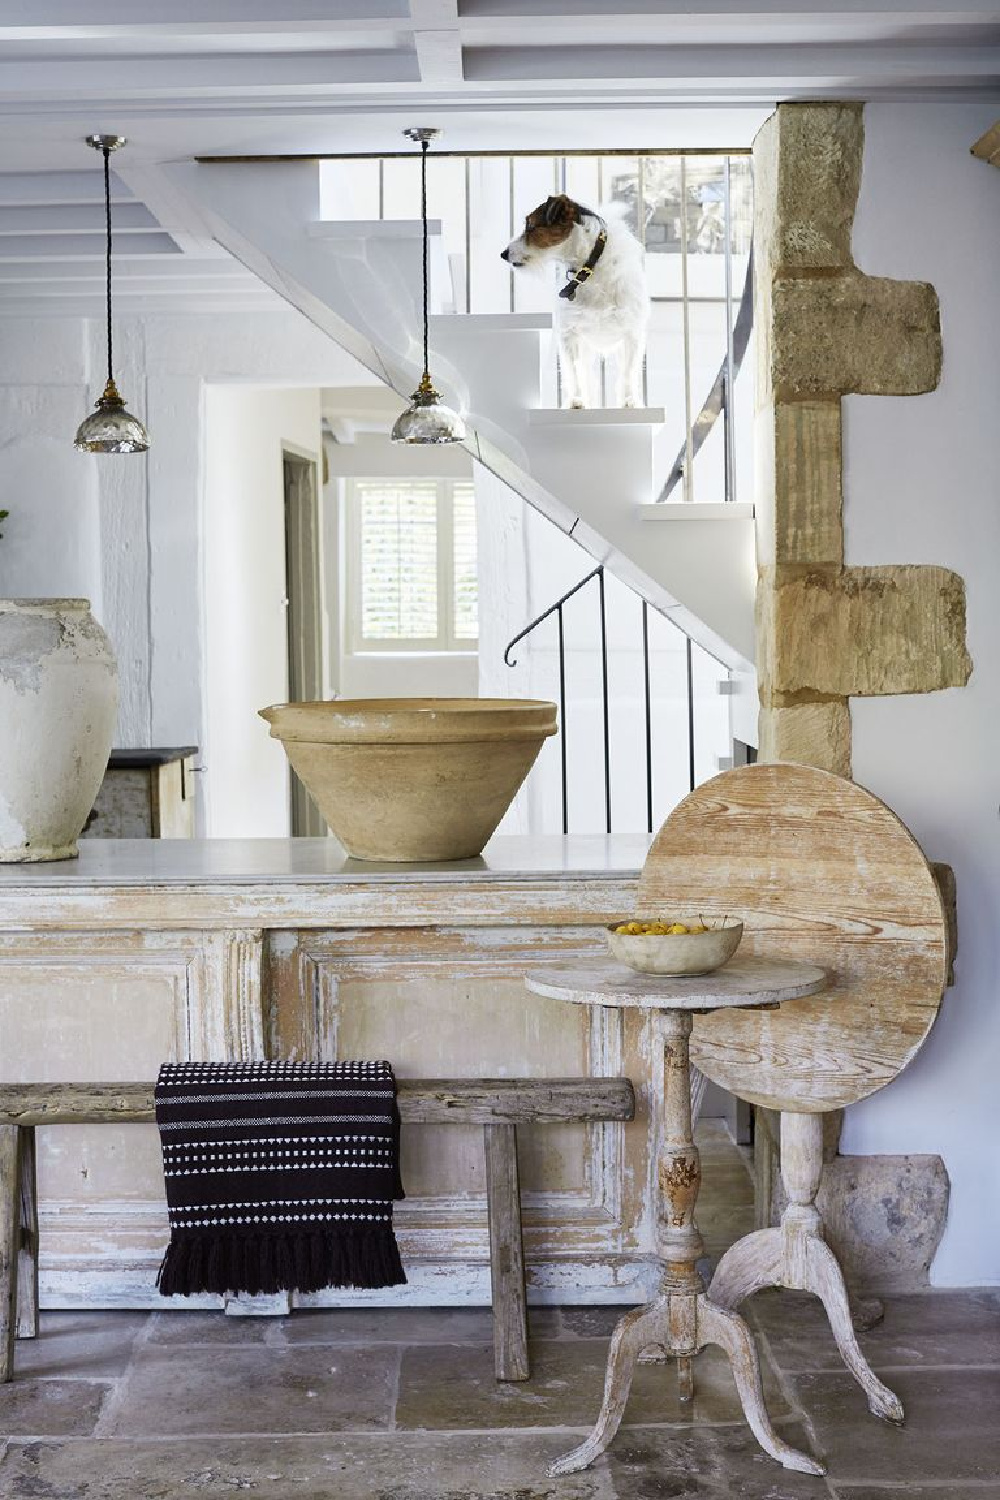 French and Swedish antiques in a Cotswolds cottage by Anton & K. #englishcottage #europeancountry #countrykitchen